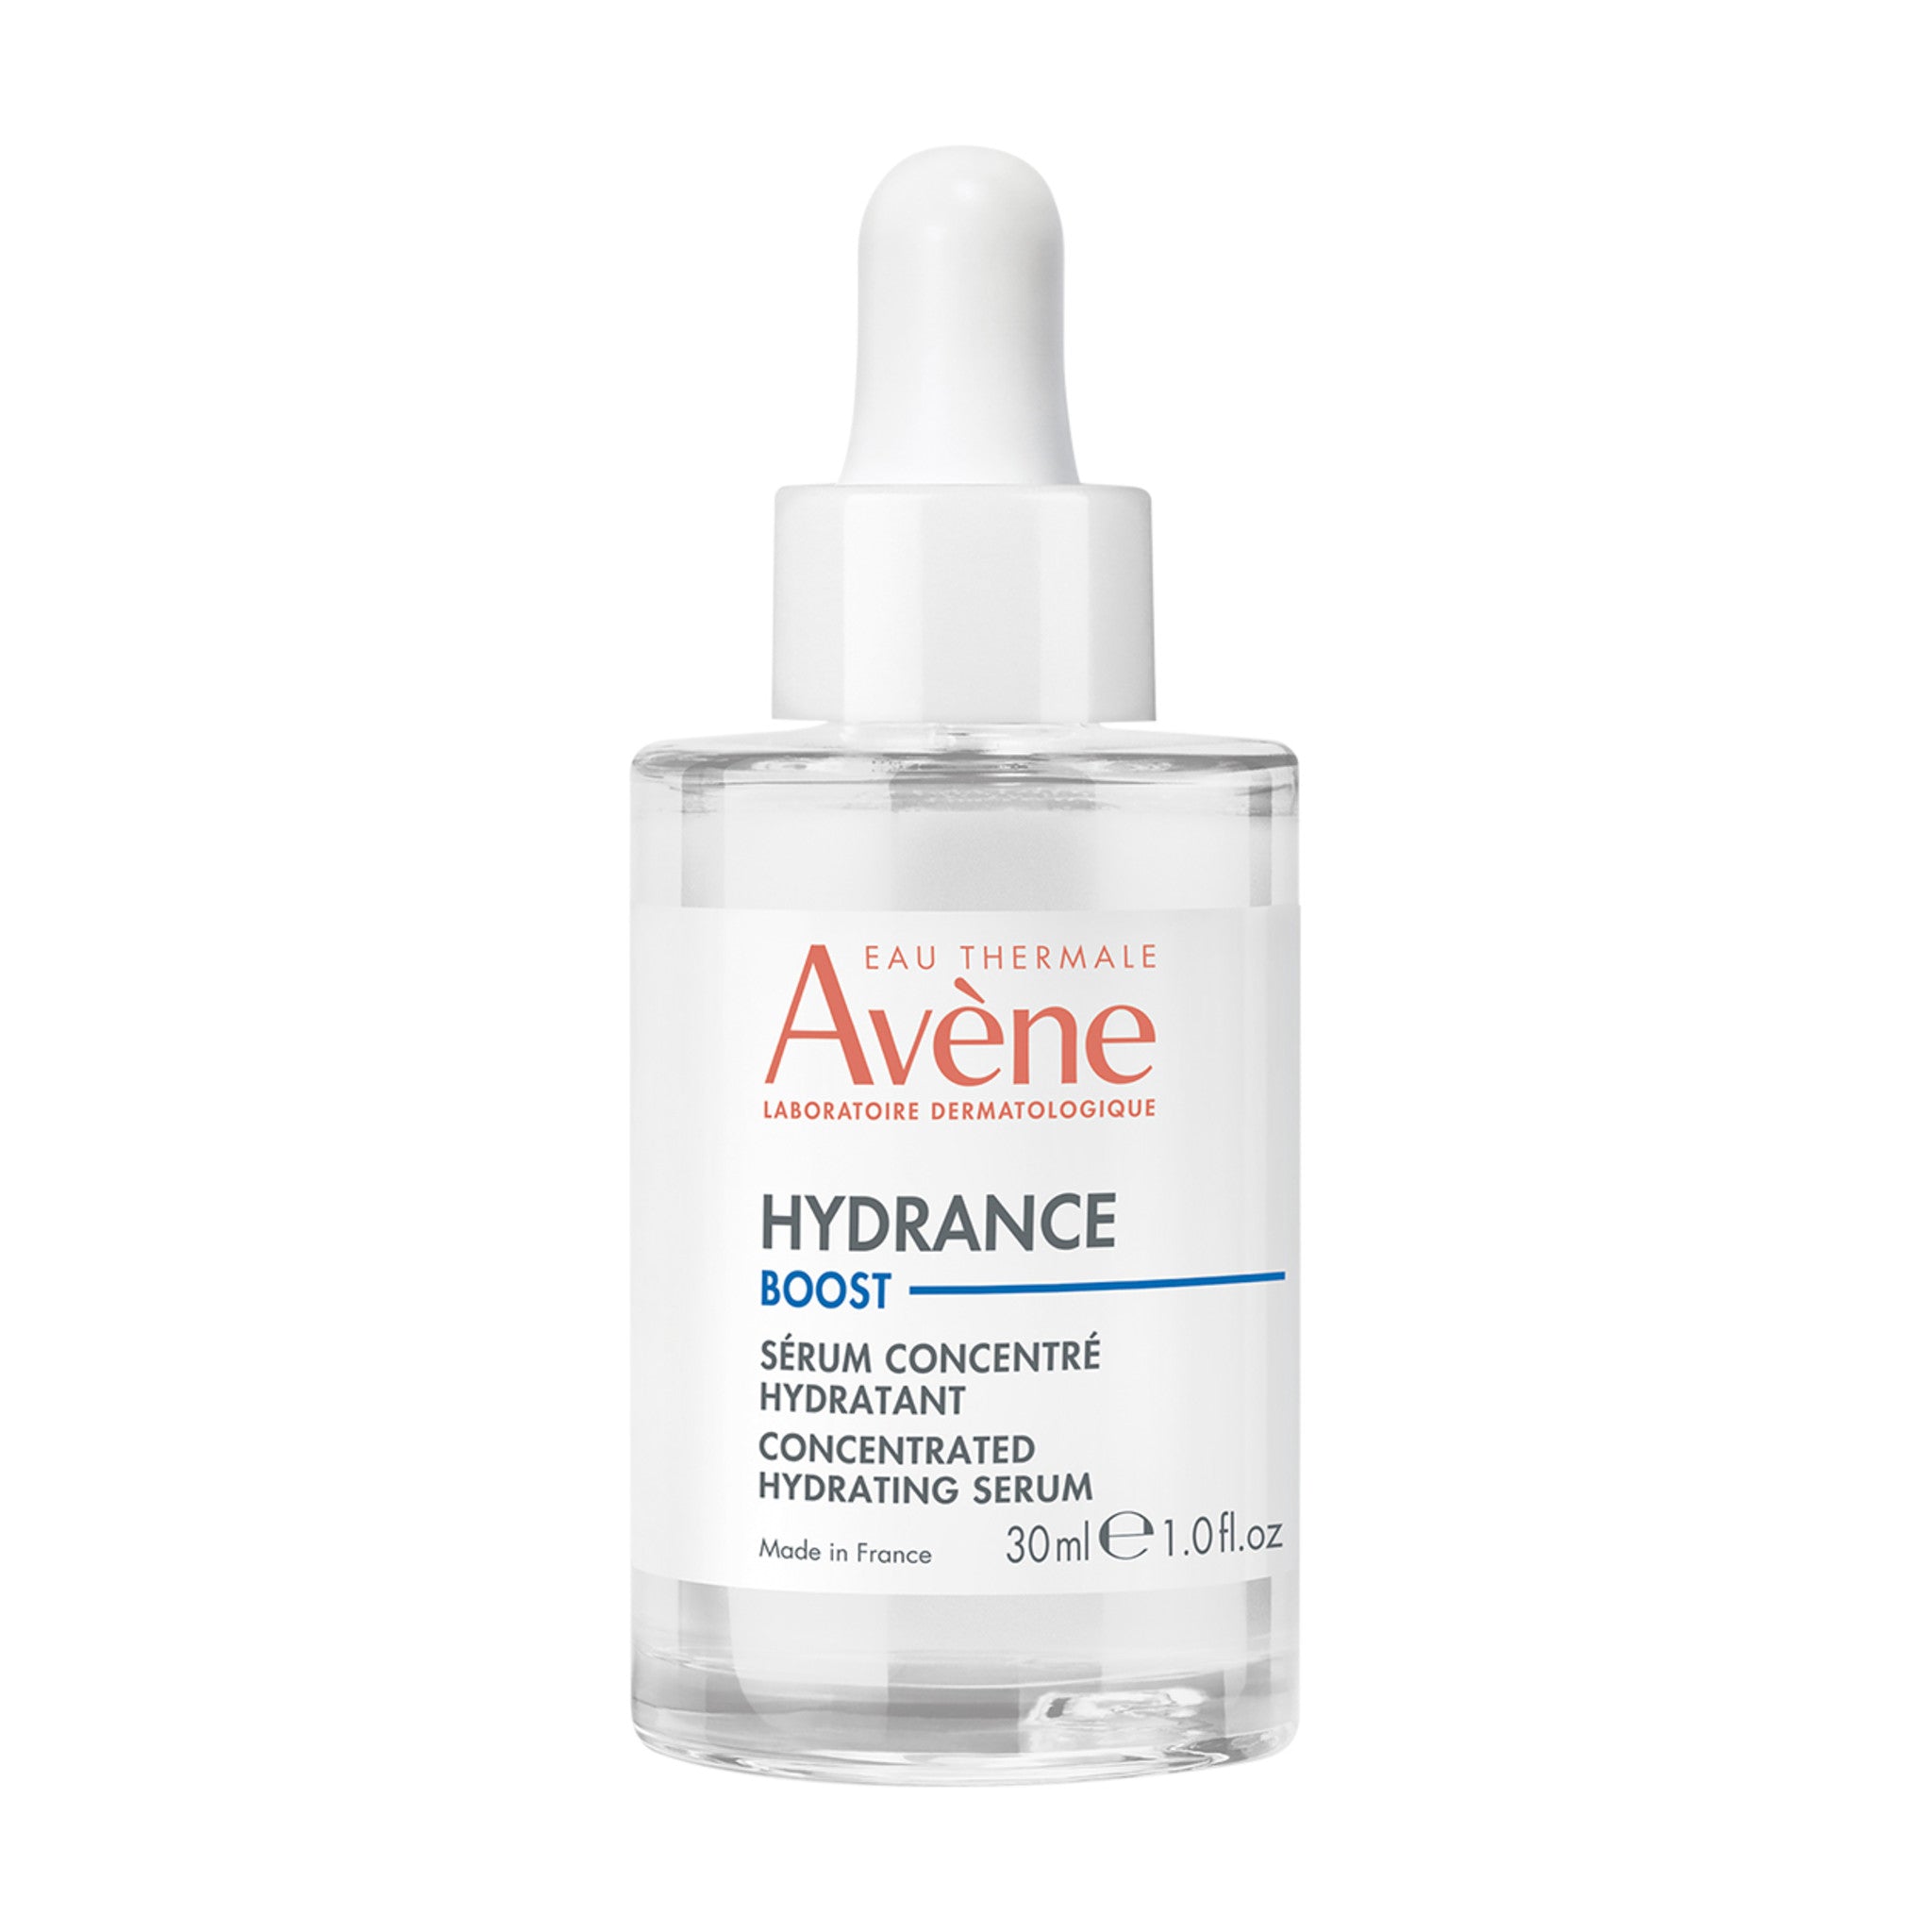 Hydrance Boost Concentrated Hydrating Serum main image.